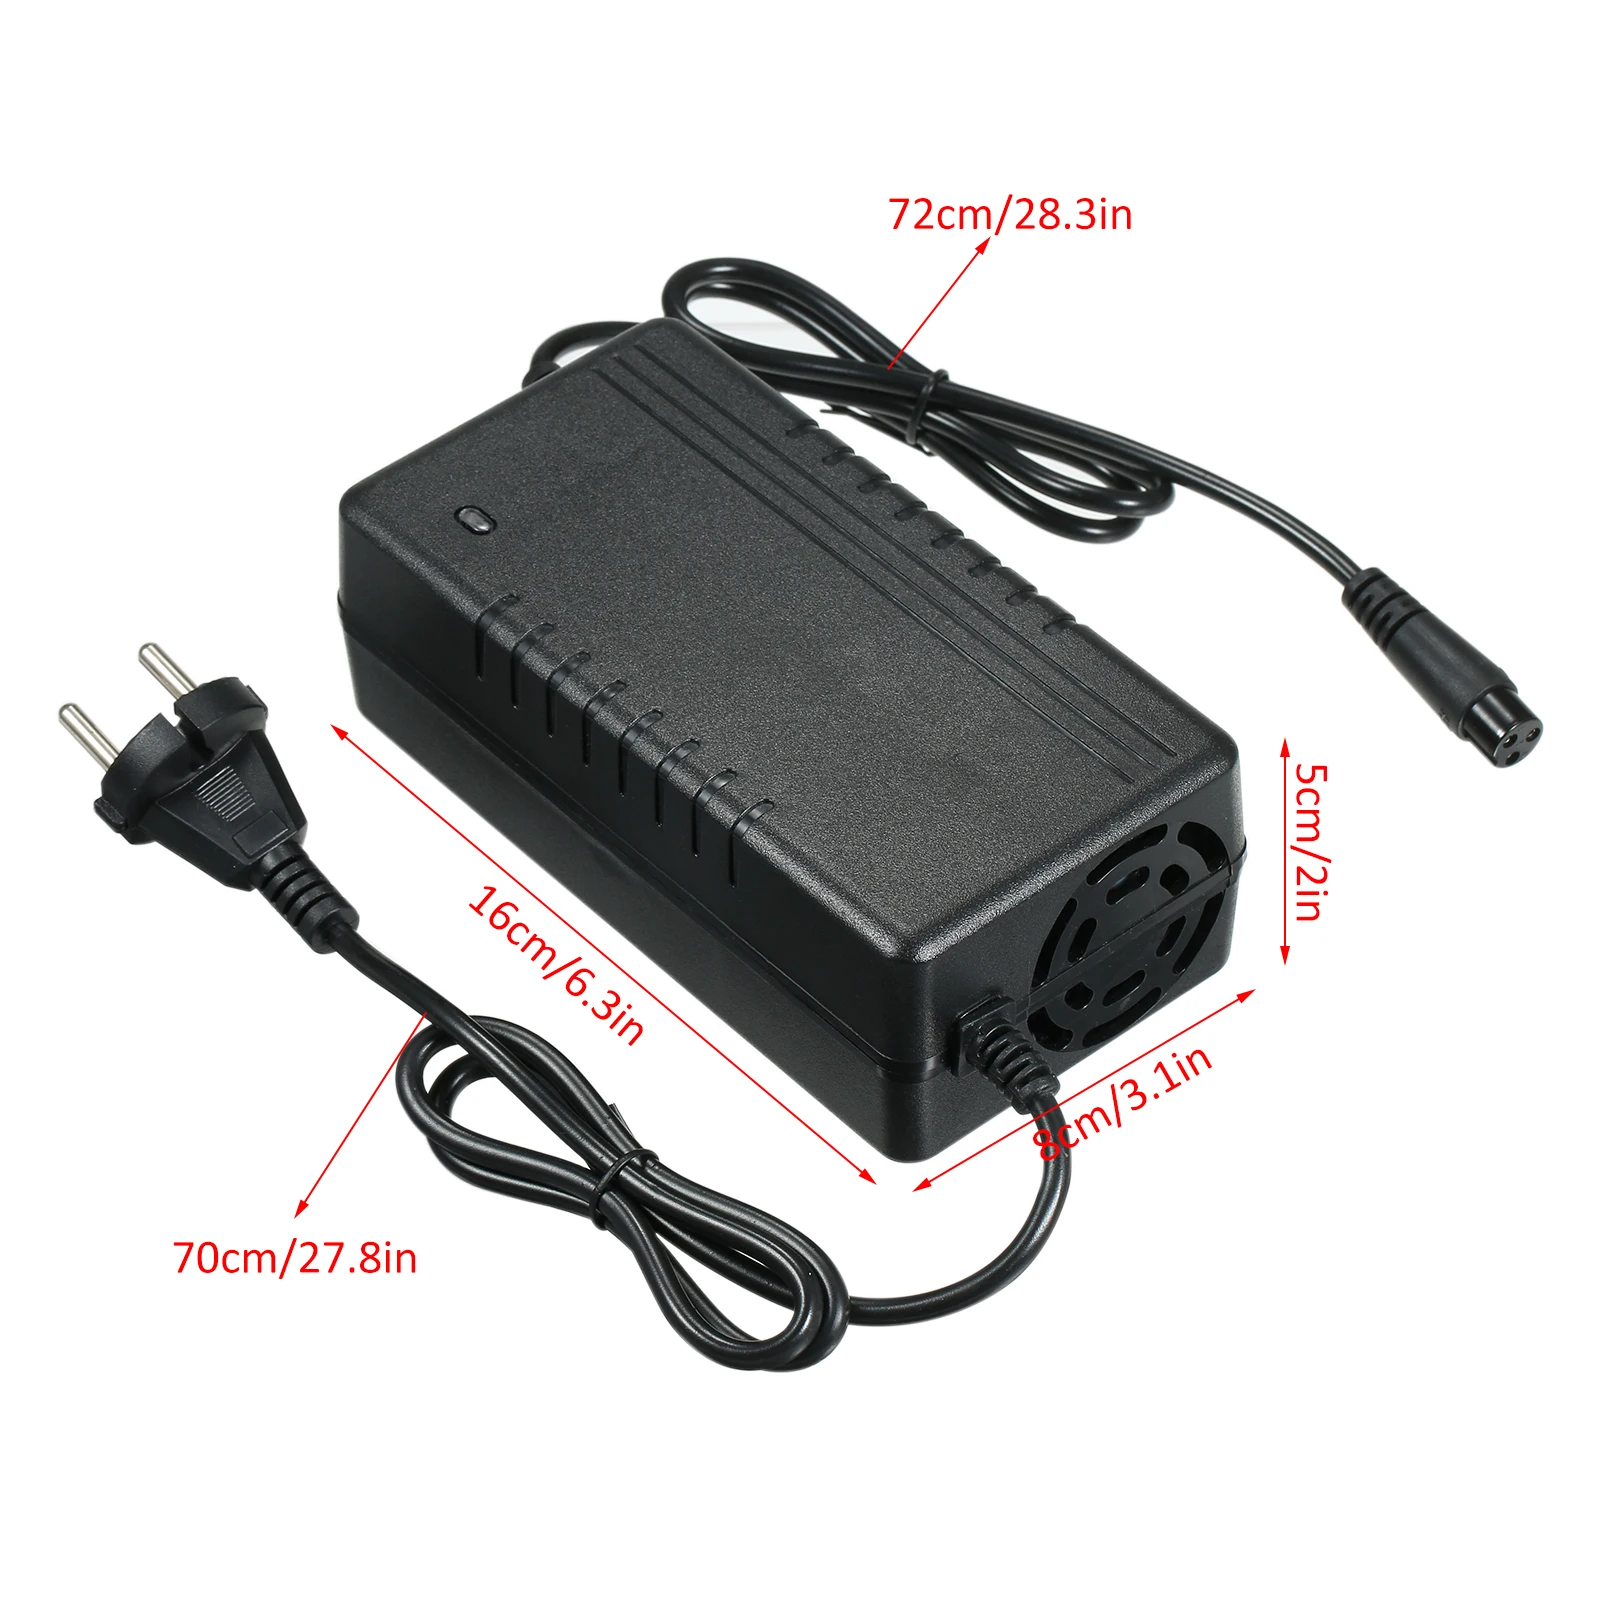 Mosquito 48V 2A Charger